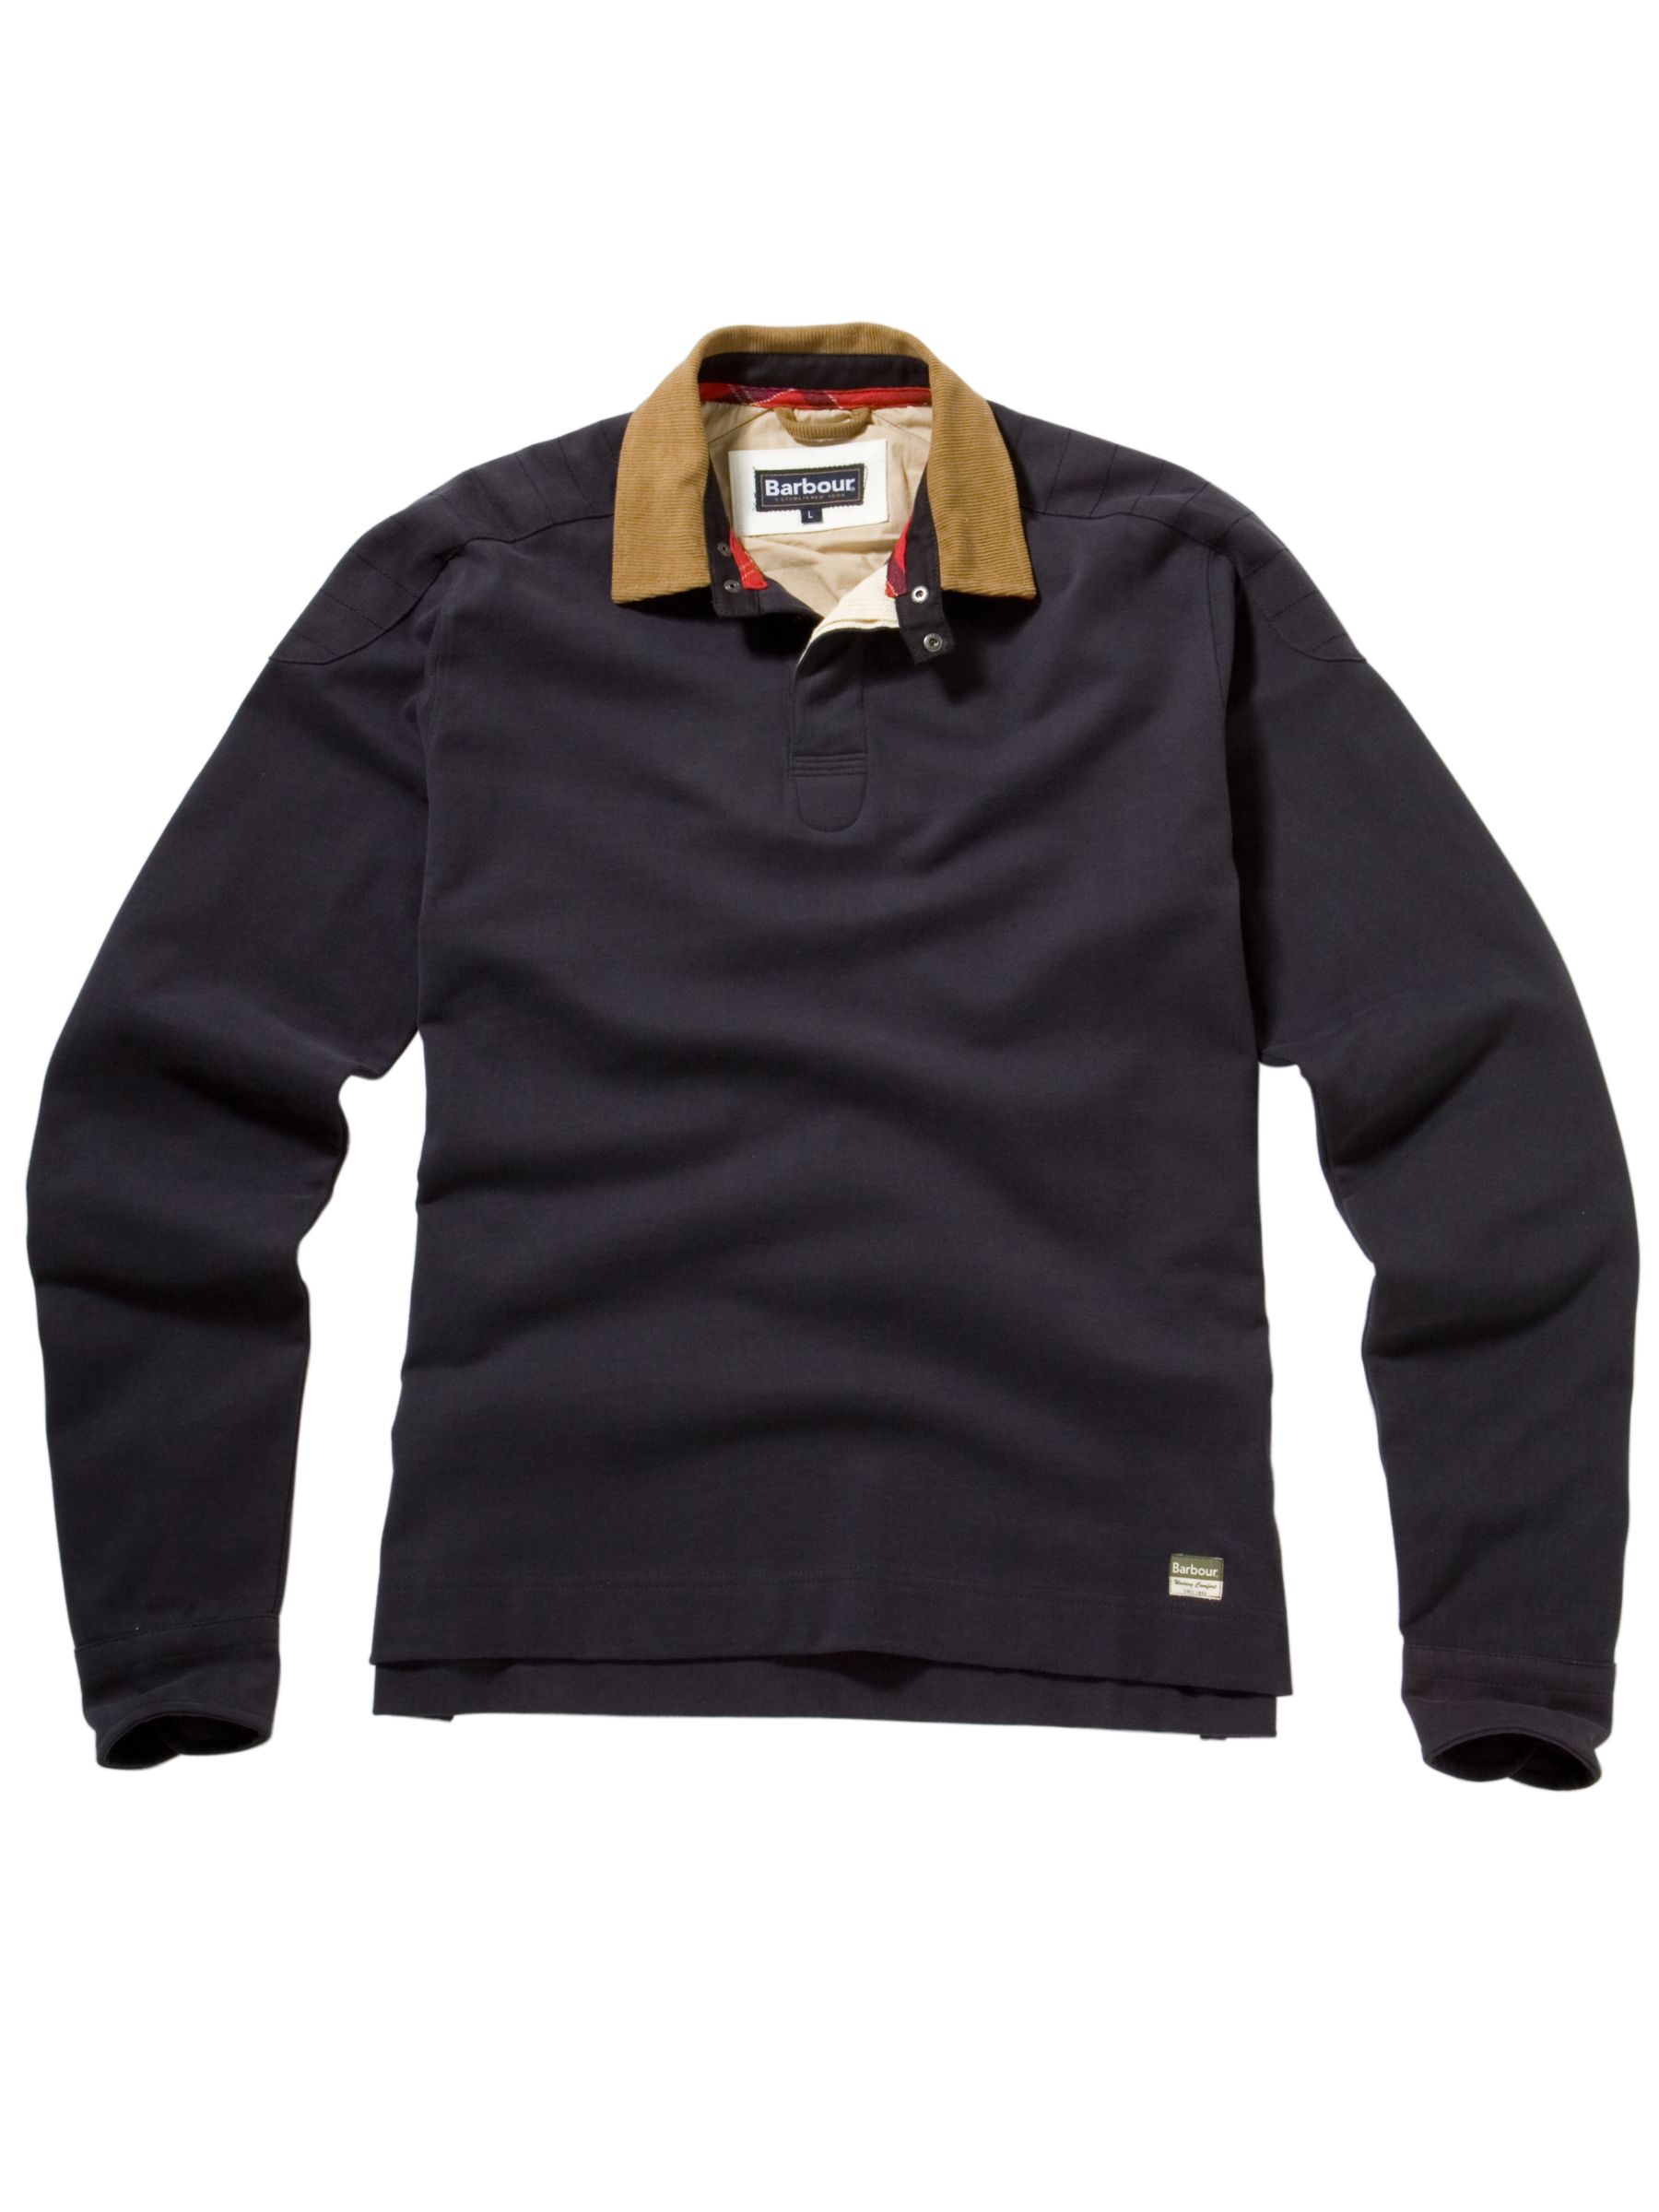 Eagle Long Sleeve Rugby Shirt, Navy